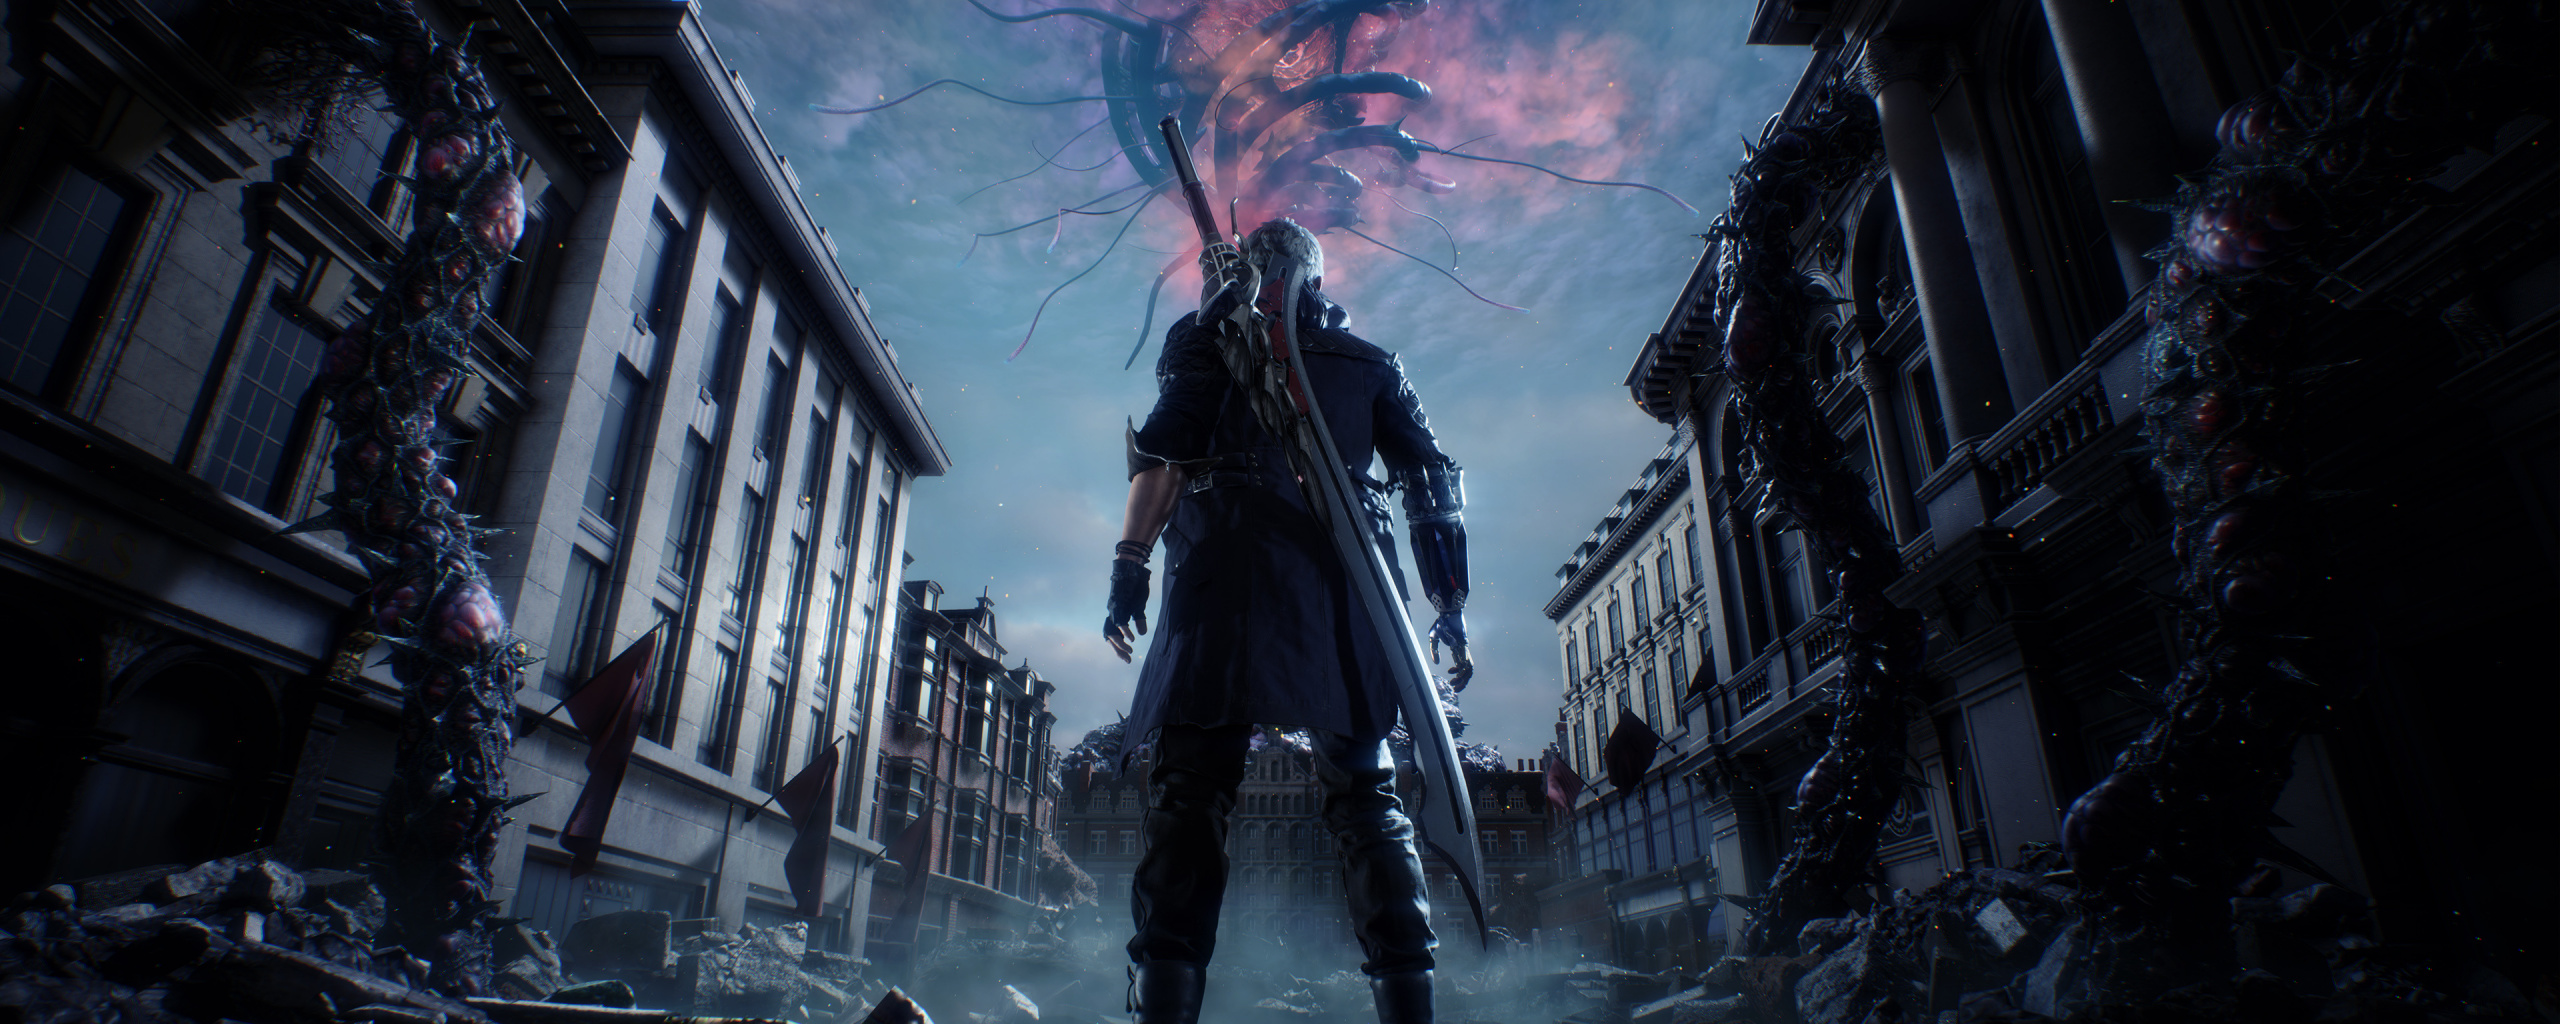 Devil May Cry 5, E3 2018, Video Game, Nero, Wallpaper - Devil May Cry 5 - HD Wallpaper 